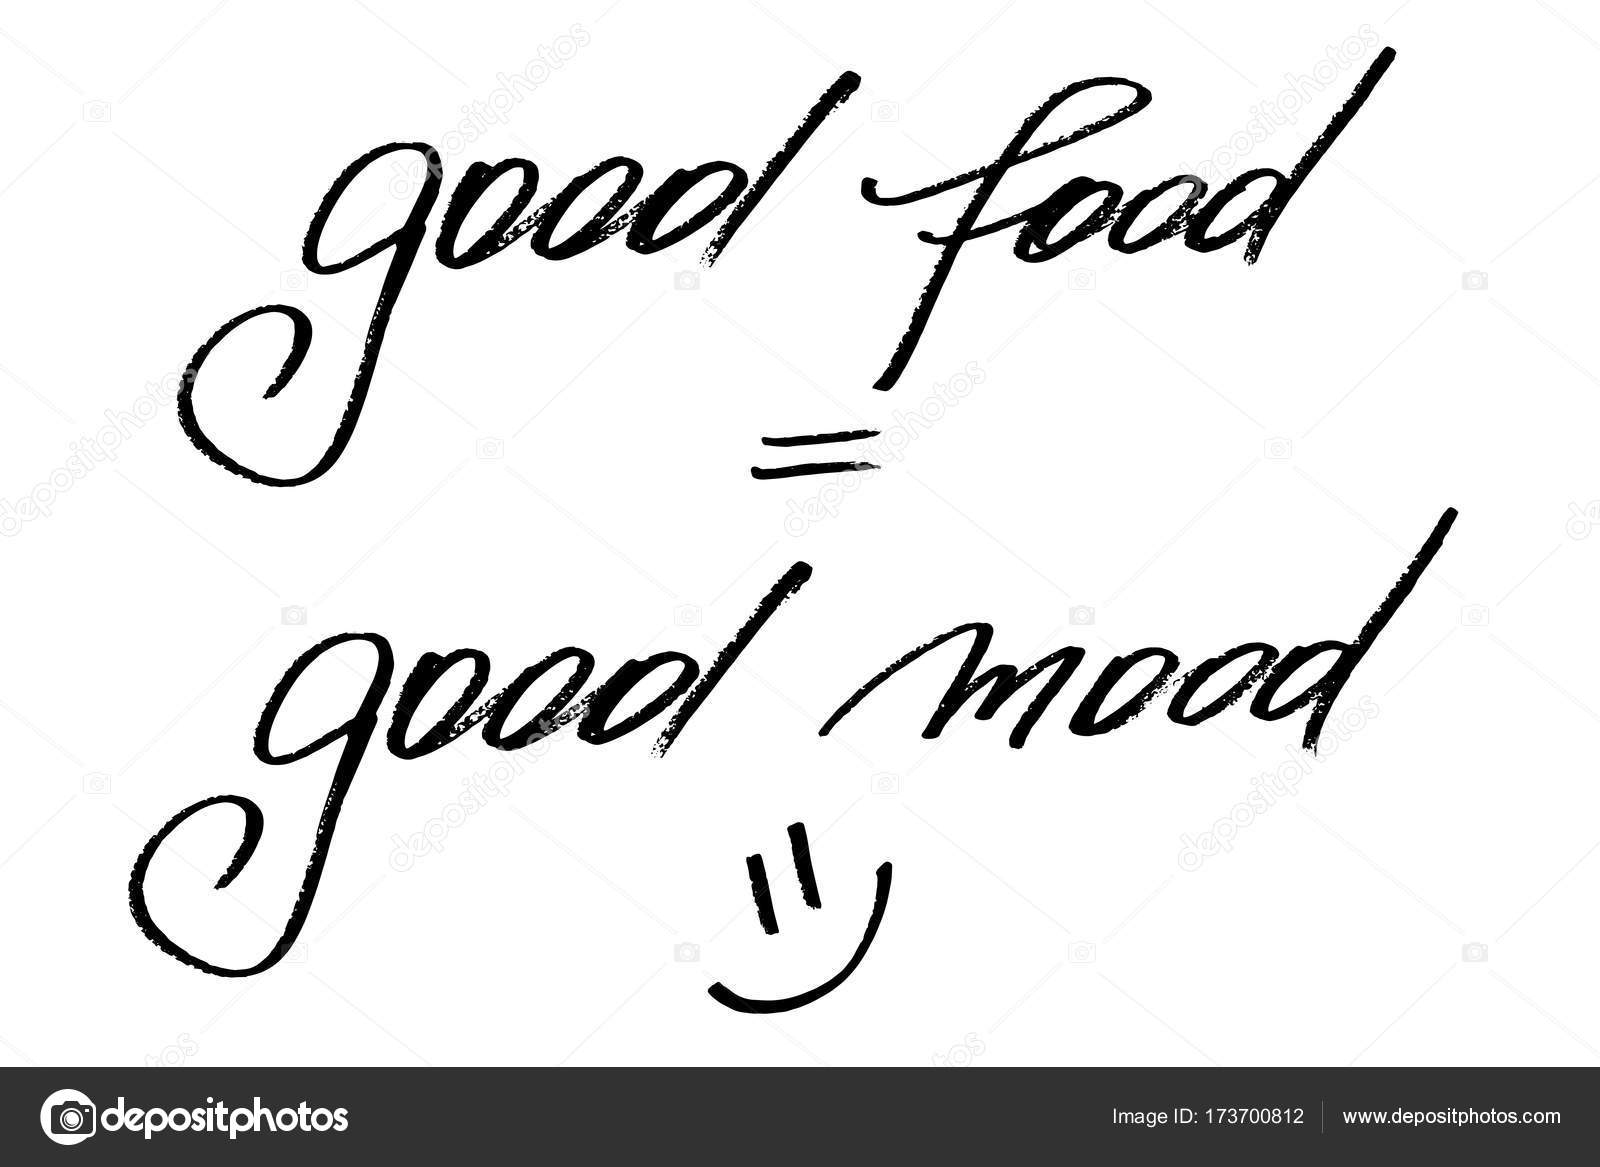 Good Food Good Mood Vector Hand Drawn Lettering Quote About, 55% OFF